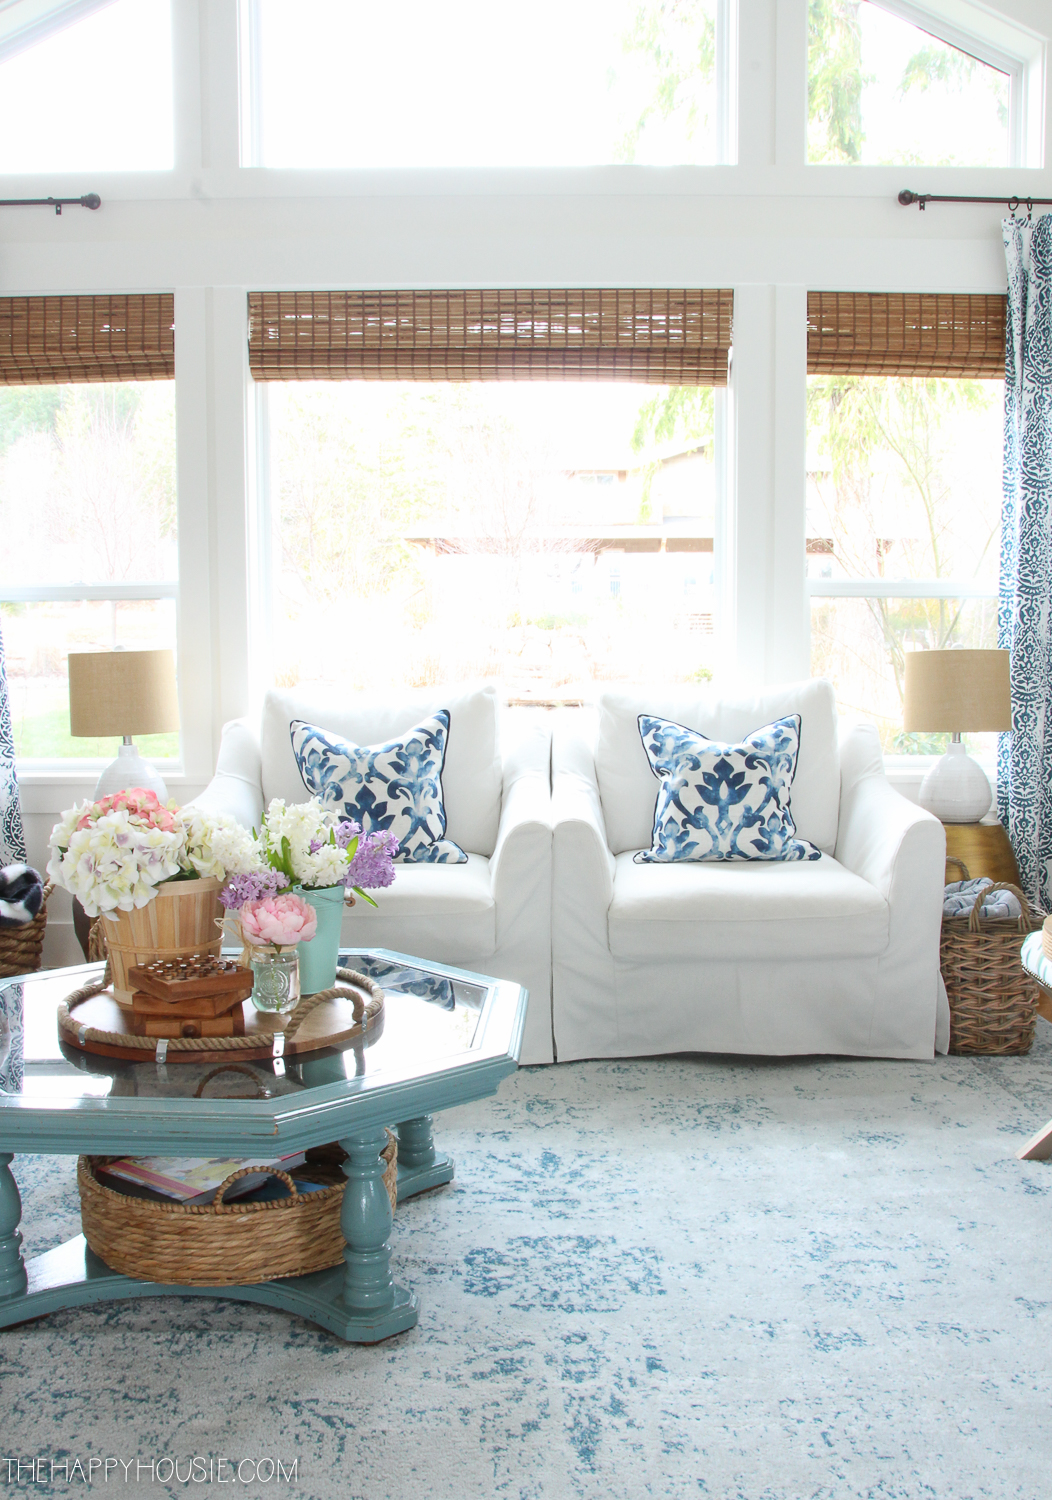 There are two white armchairs with blue pillows in the living room.